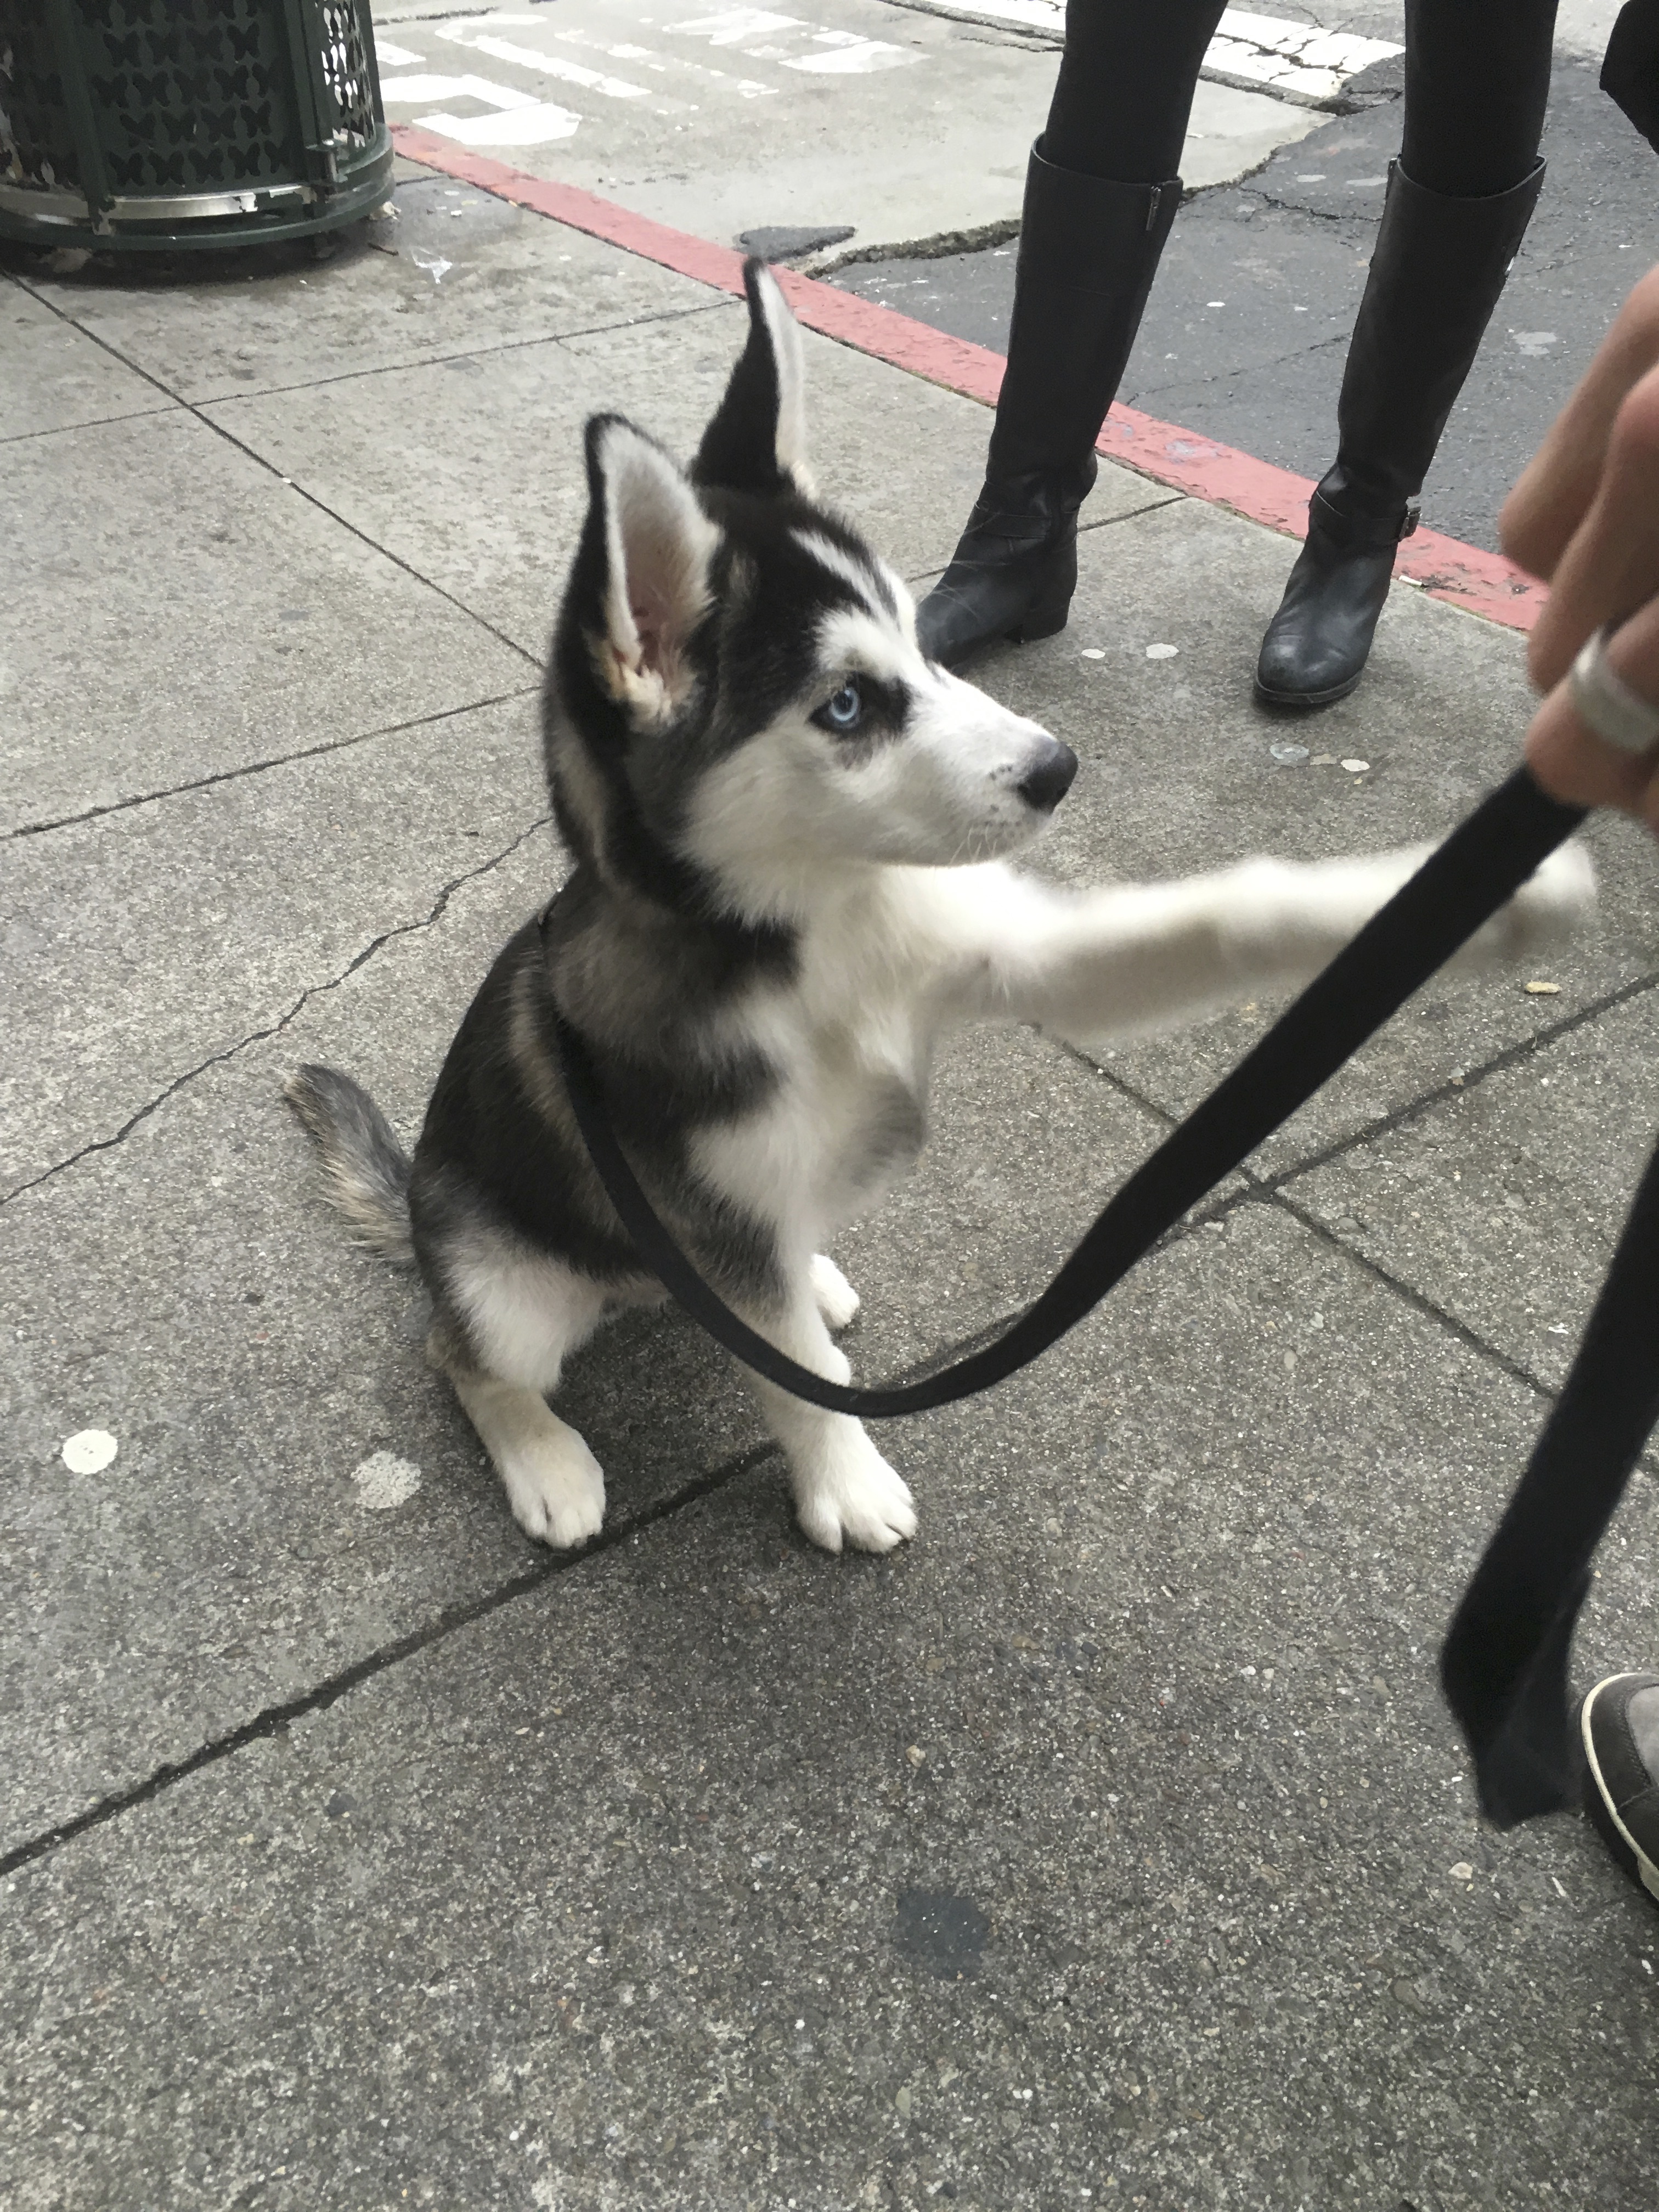 Thor, an Adorable 4 Month Old Siberian Husky Puppy Trying To Shake